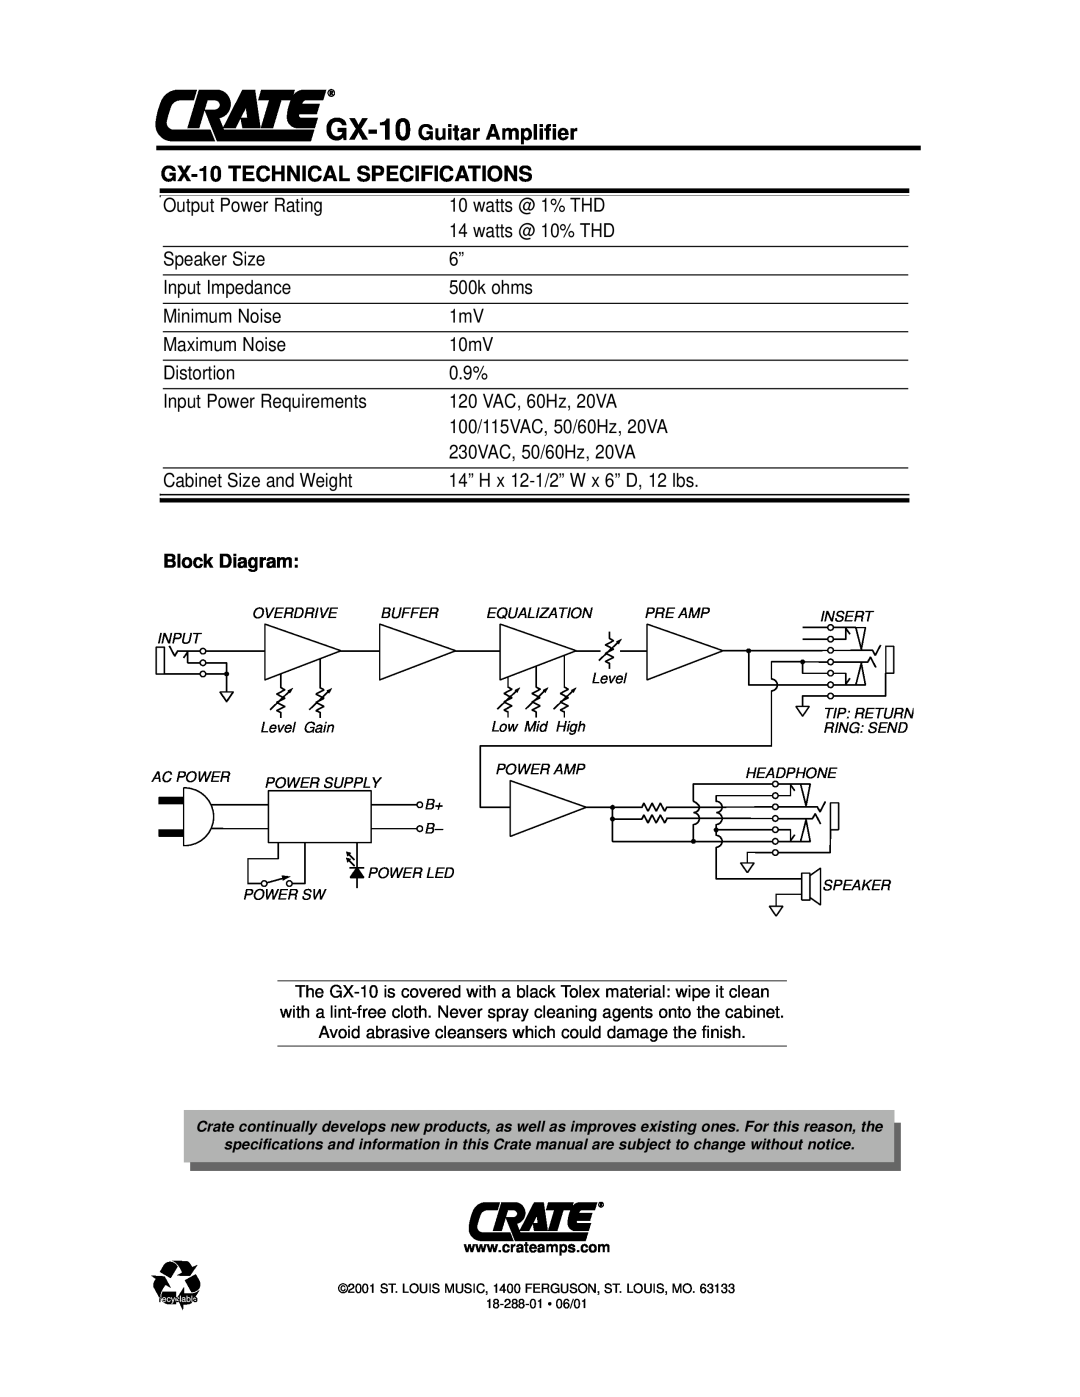 Crate Amplifiers owner manual GX-10TECHNICAL SPECIFICATIONS, GX-10 Guitar Amplifier, Block Diagram 